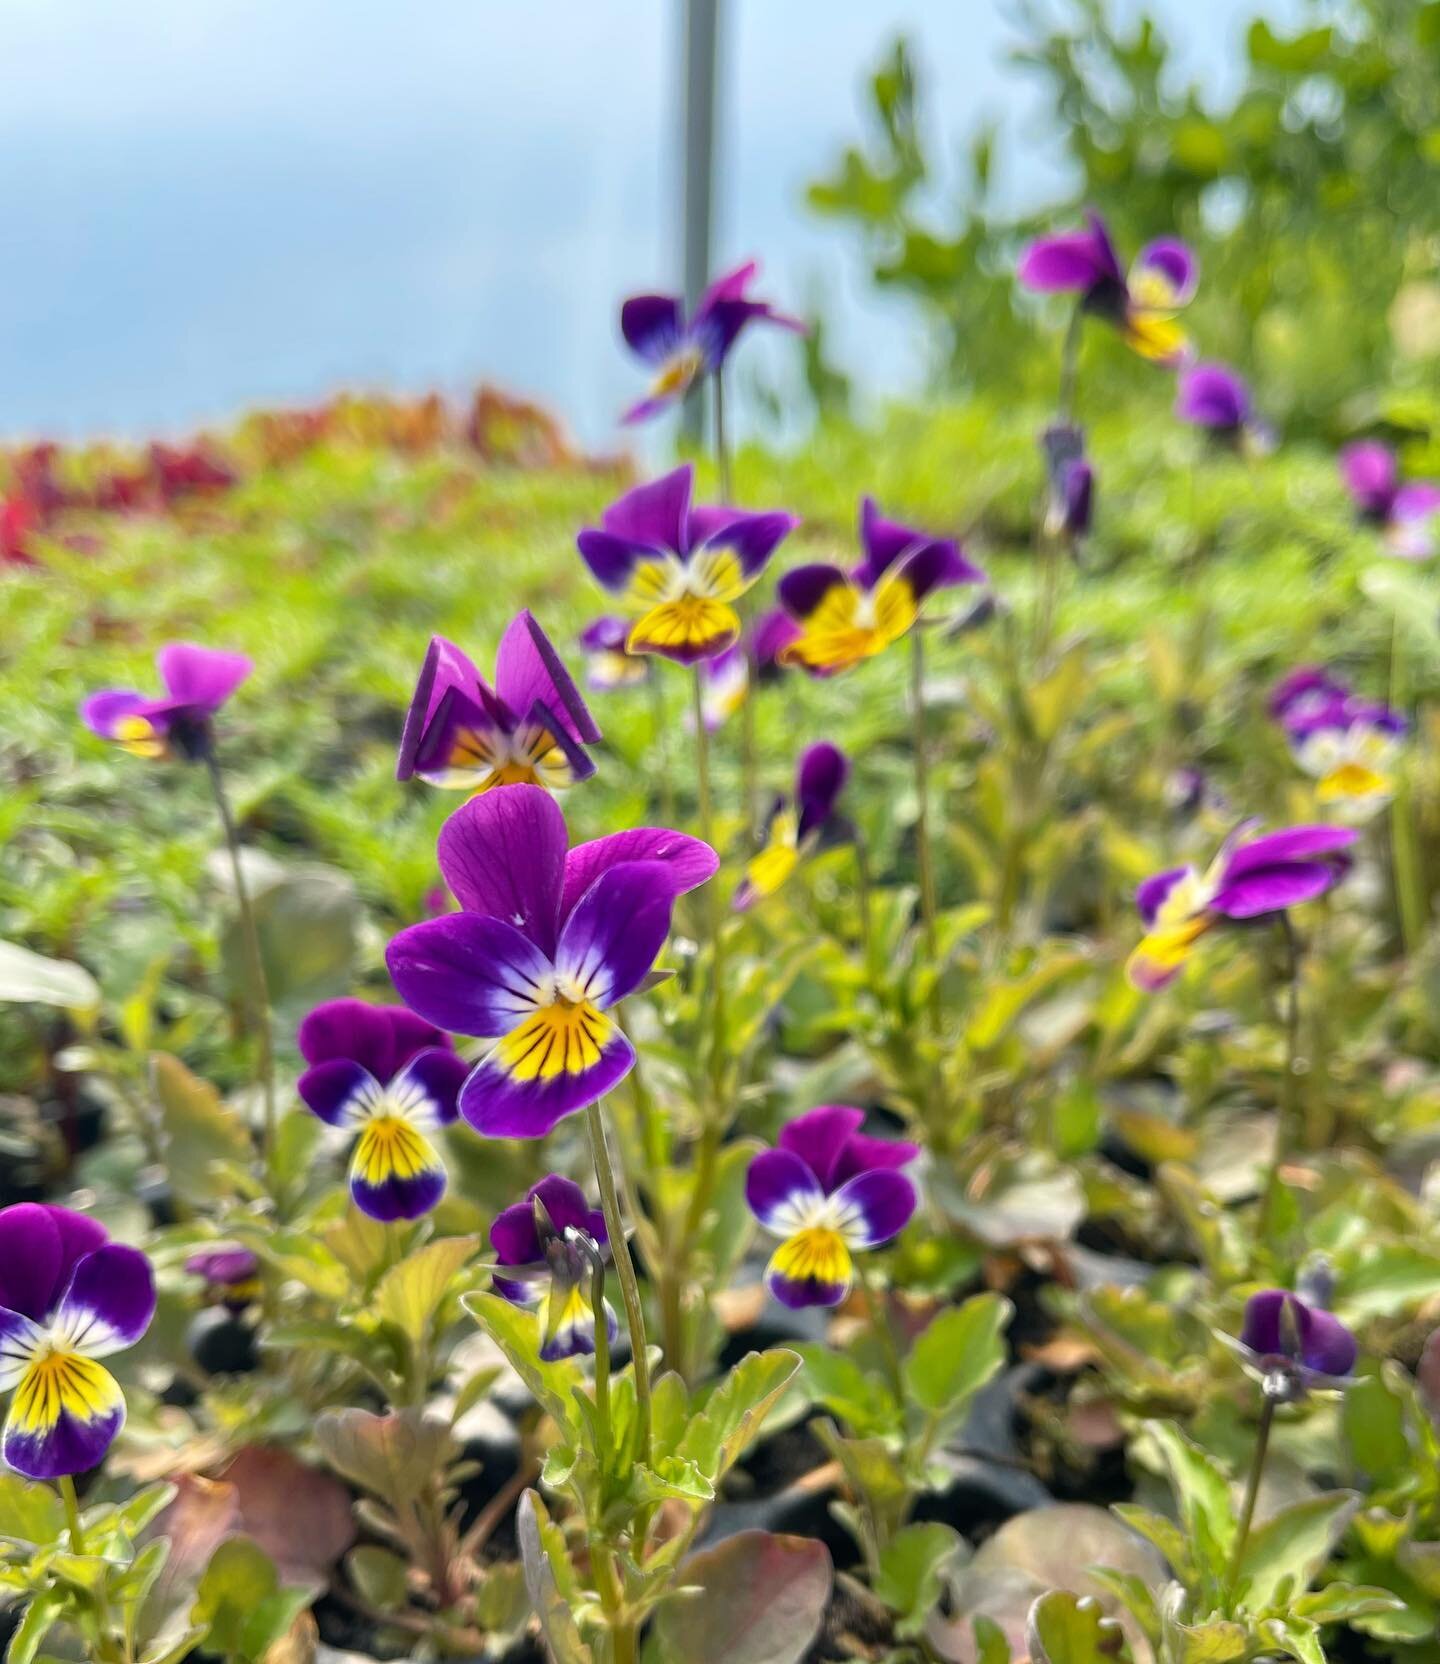 Viola Tricolor 💜
Also known as heartsease for its medicinal purposes, we absolutely love this edible flower. One you&rsquo;ll be finding in our salad bags for sure. 
.
#edibleflowers #purple #violatricolor #salad #biodynamic #smallholding #growing #